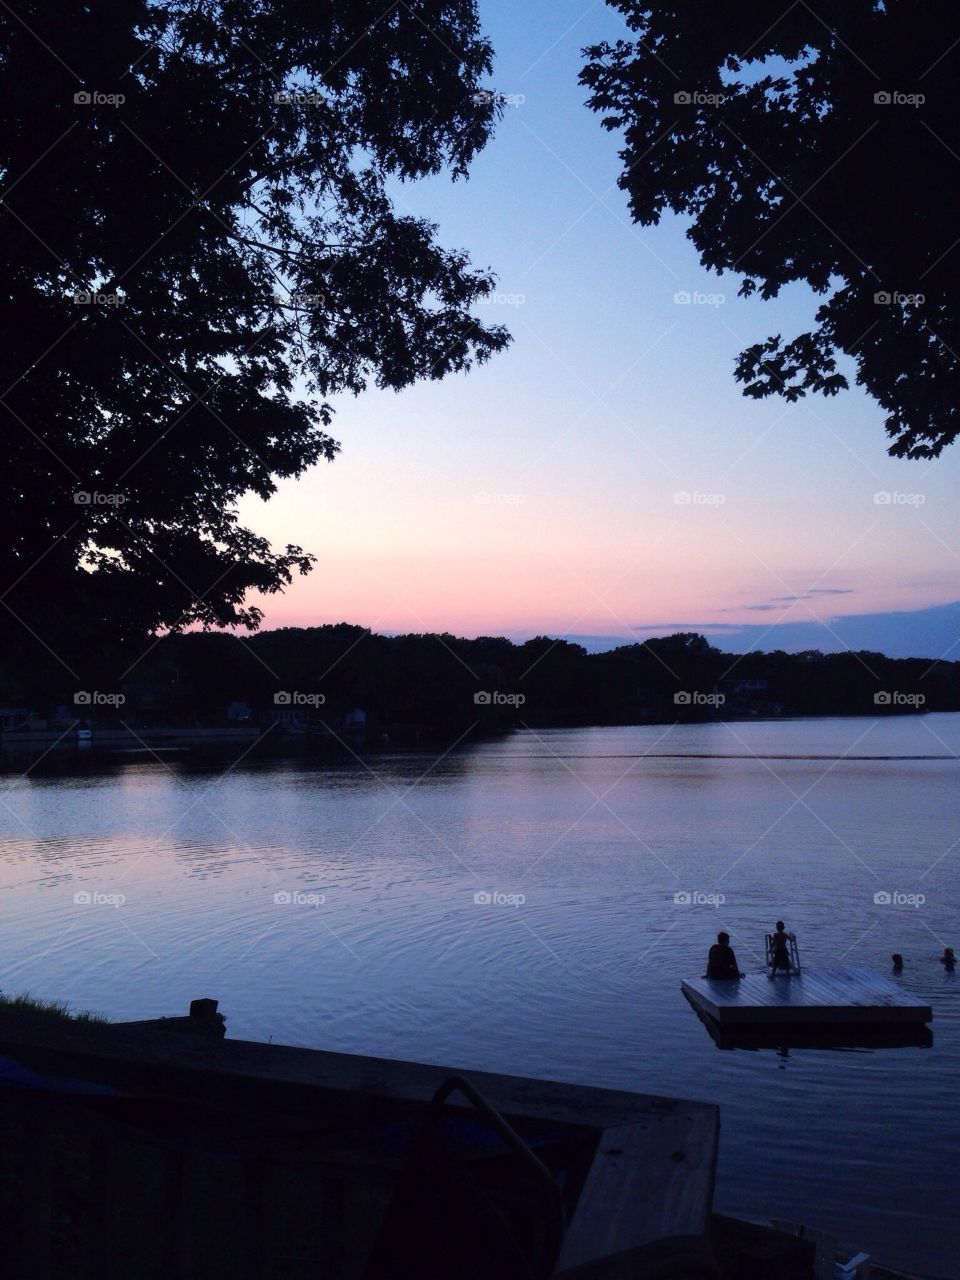 Summer evening sunset over a placid lake, surrounded by silhouetted trees and shoreline. (Lake Hiawatha, Bellingham, MA USA)